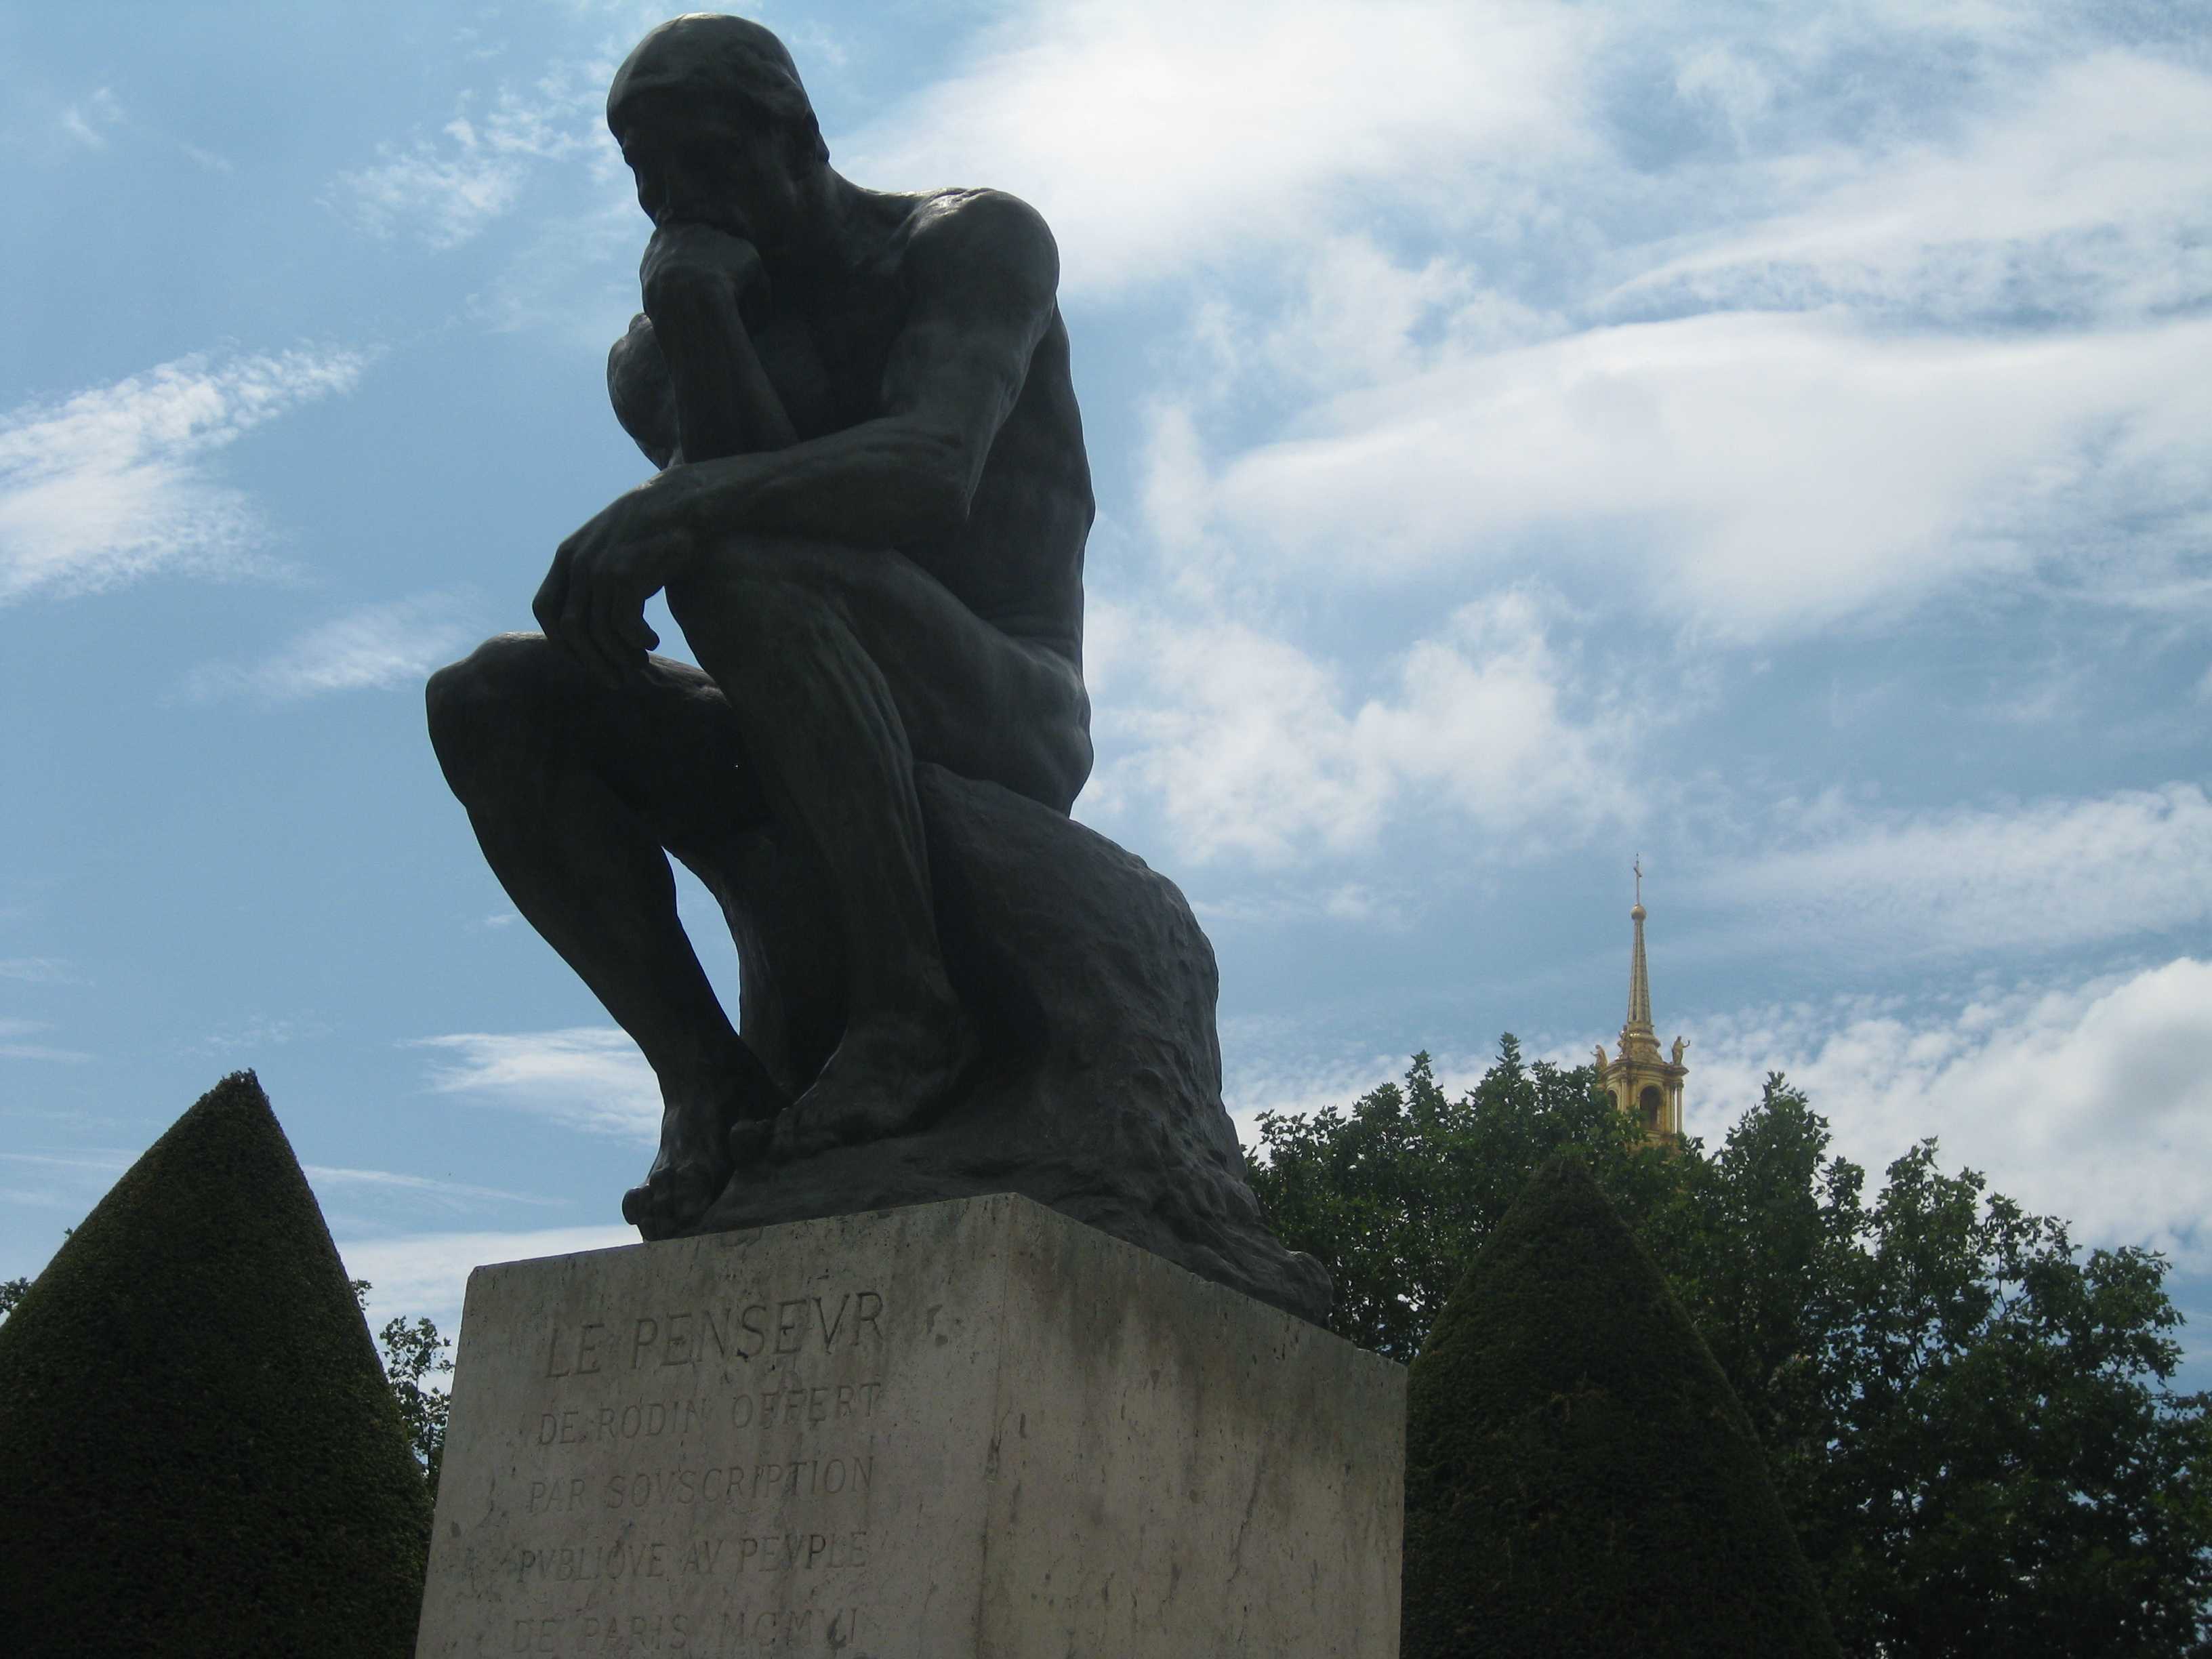 Le Penseur, the Thinker, in the Rodin Museum